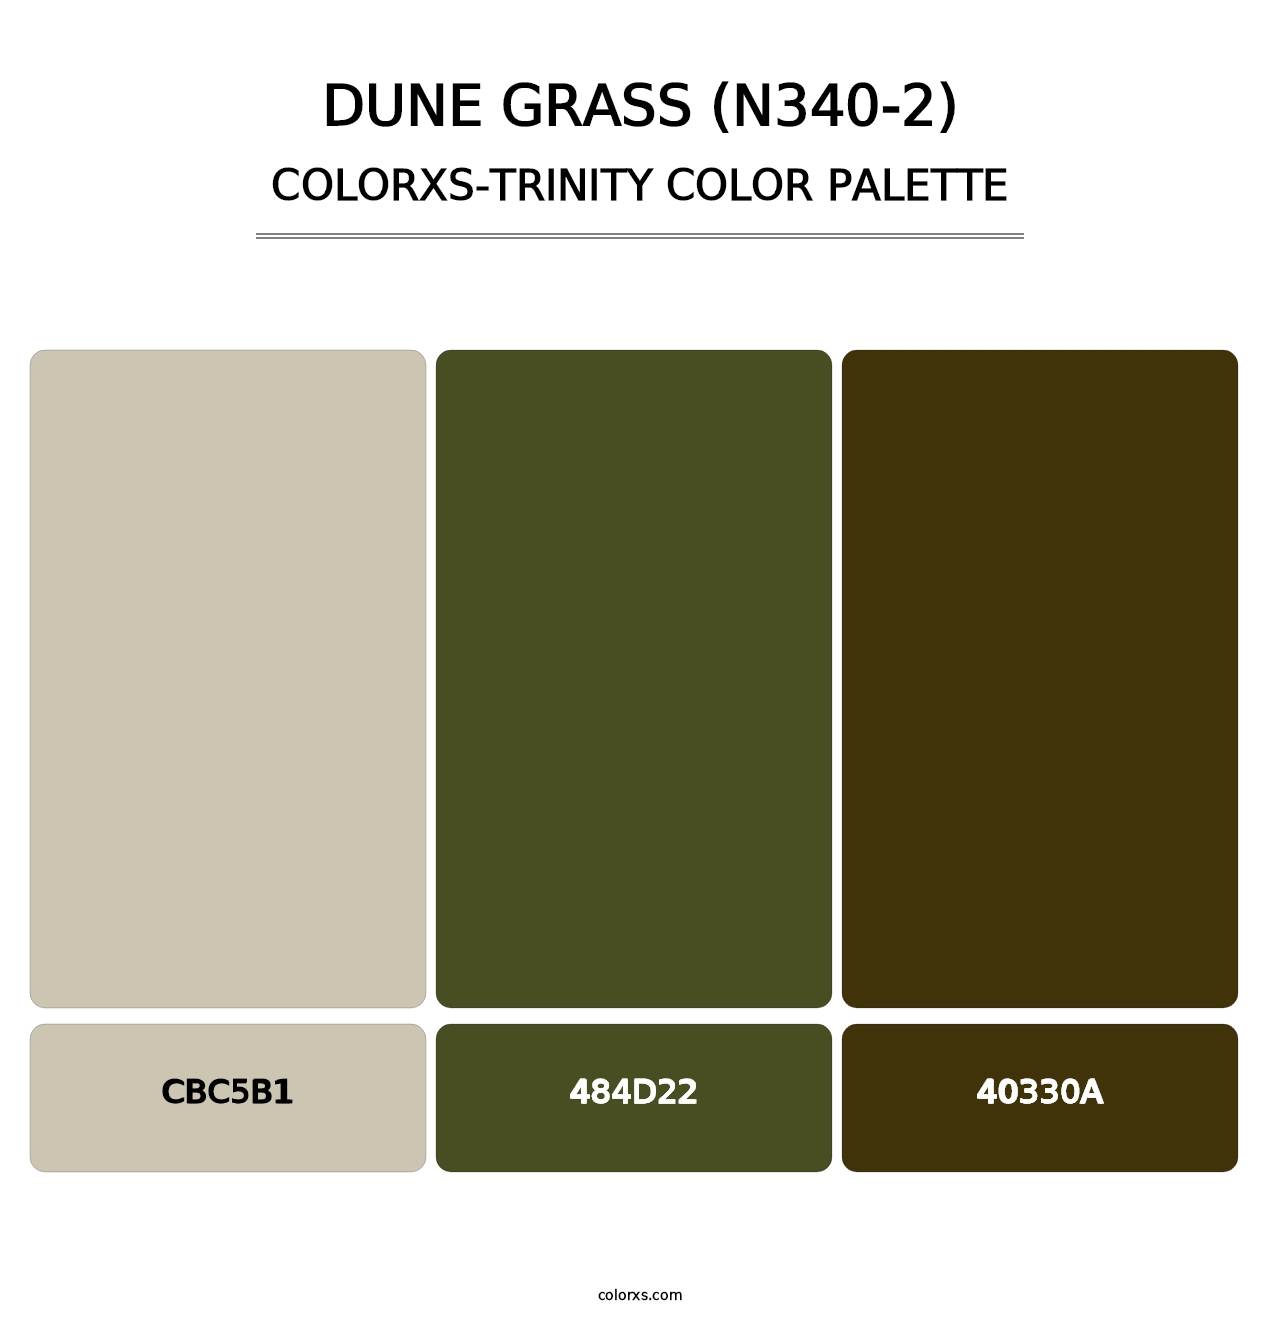 Dune Grass (N340-2) - Colorxs Trinity Palette